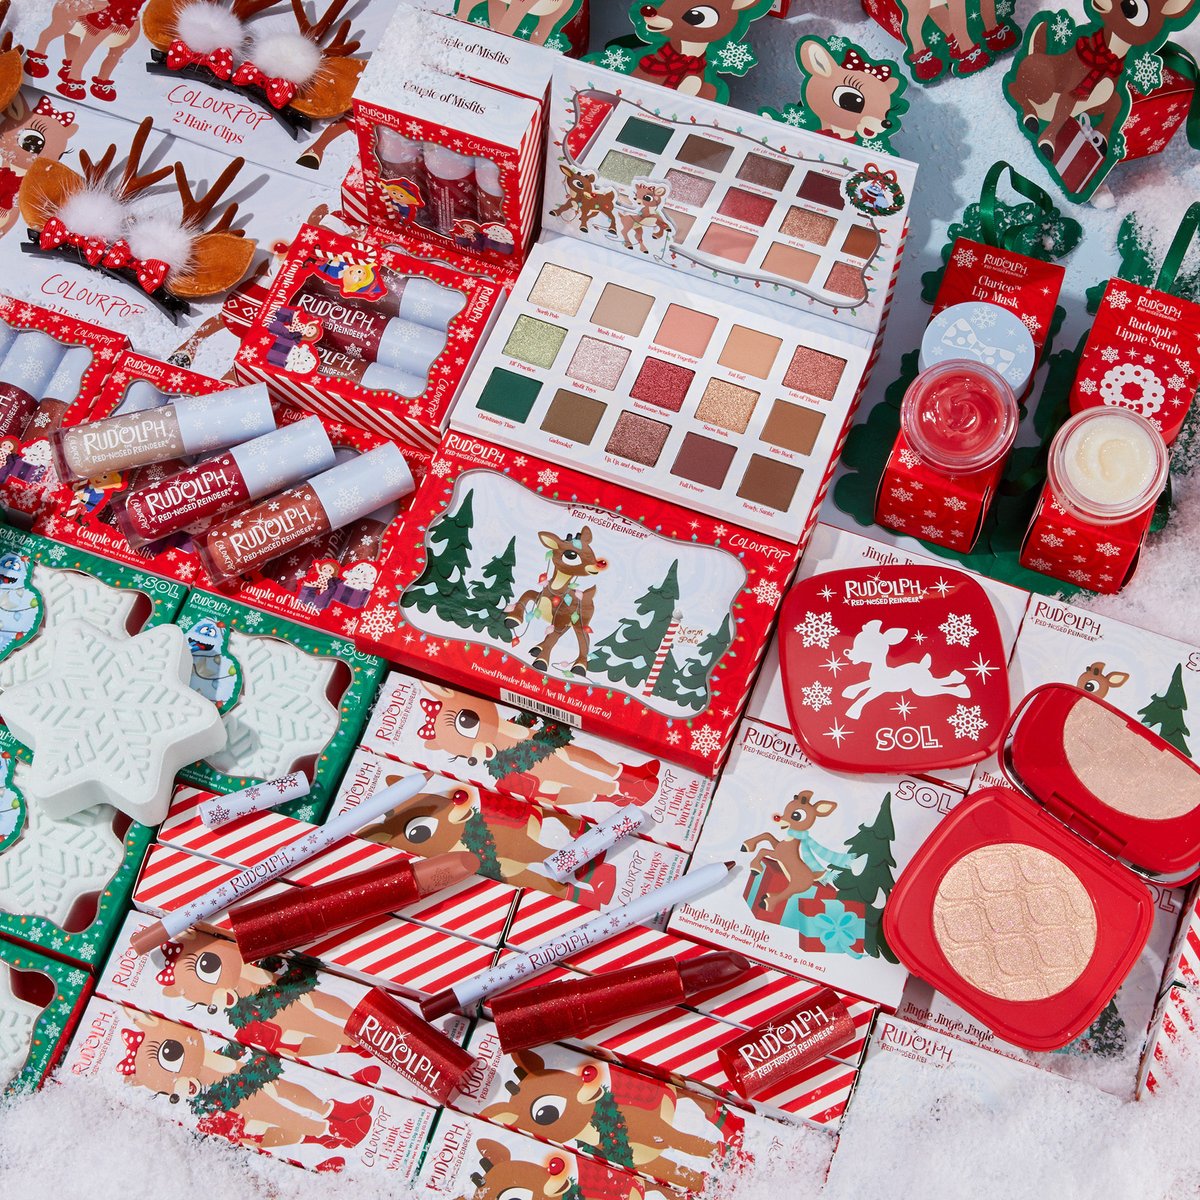 #SURPRISEGIVEAWAY ✨ 

🎄🦌🎁 5 lucky winners will receive the full *LIMITED EDITION* Rudolph the Red-Nosed Reindeer® and ColourPop Collection!

⬇️HOW TO ENTER ⬇️
💫  Follow us @ColourPopCo, @SolBodyCo, & @FourthRayBeauty  
💫  Like & RT
💫  BONUS: Reply w/ your fave reindeer!